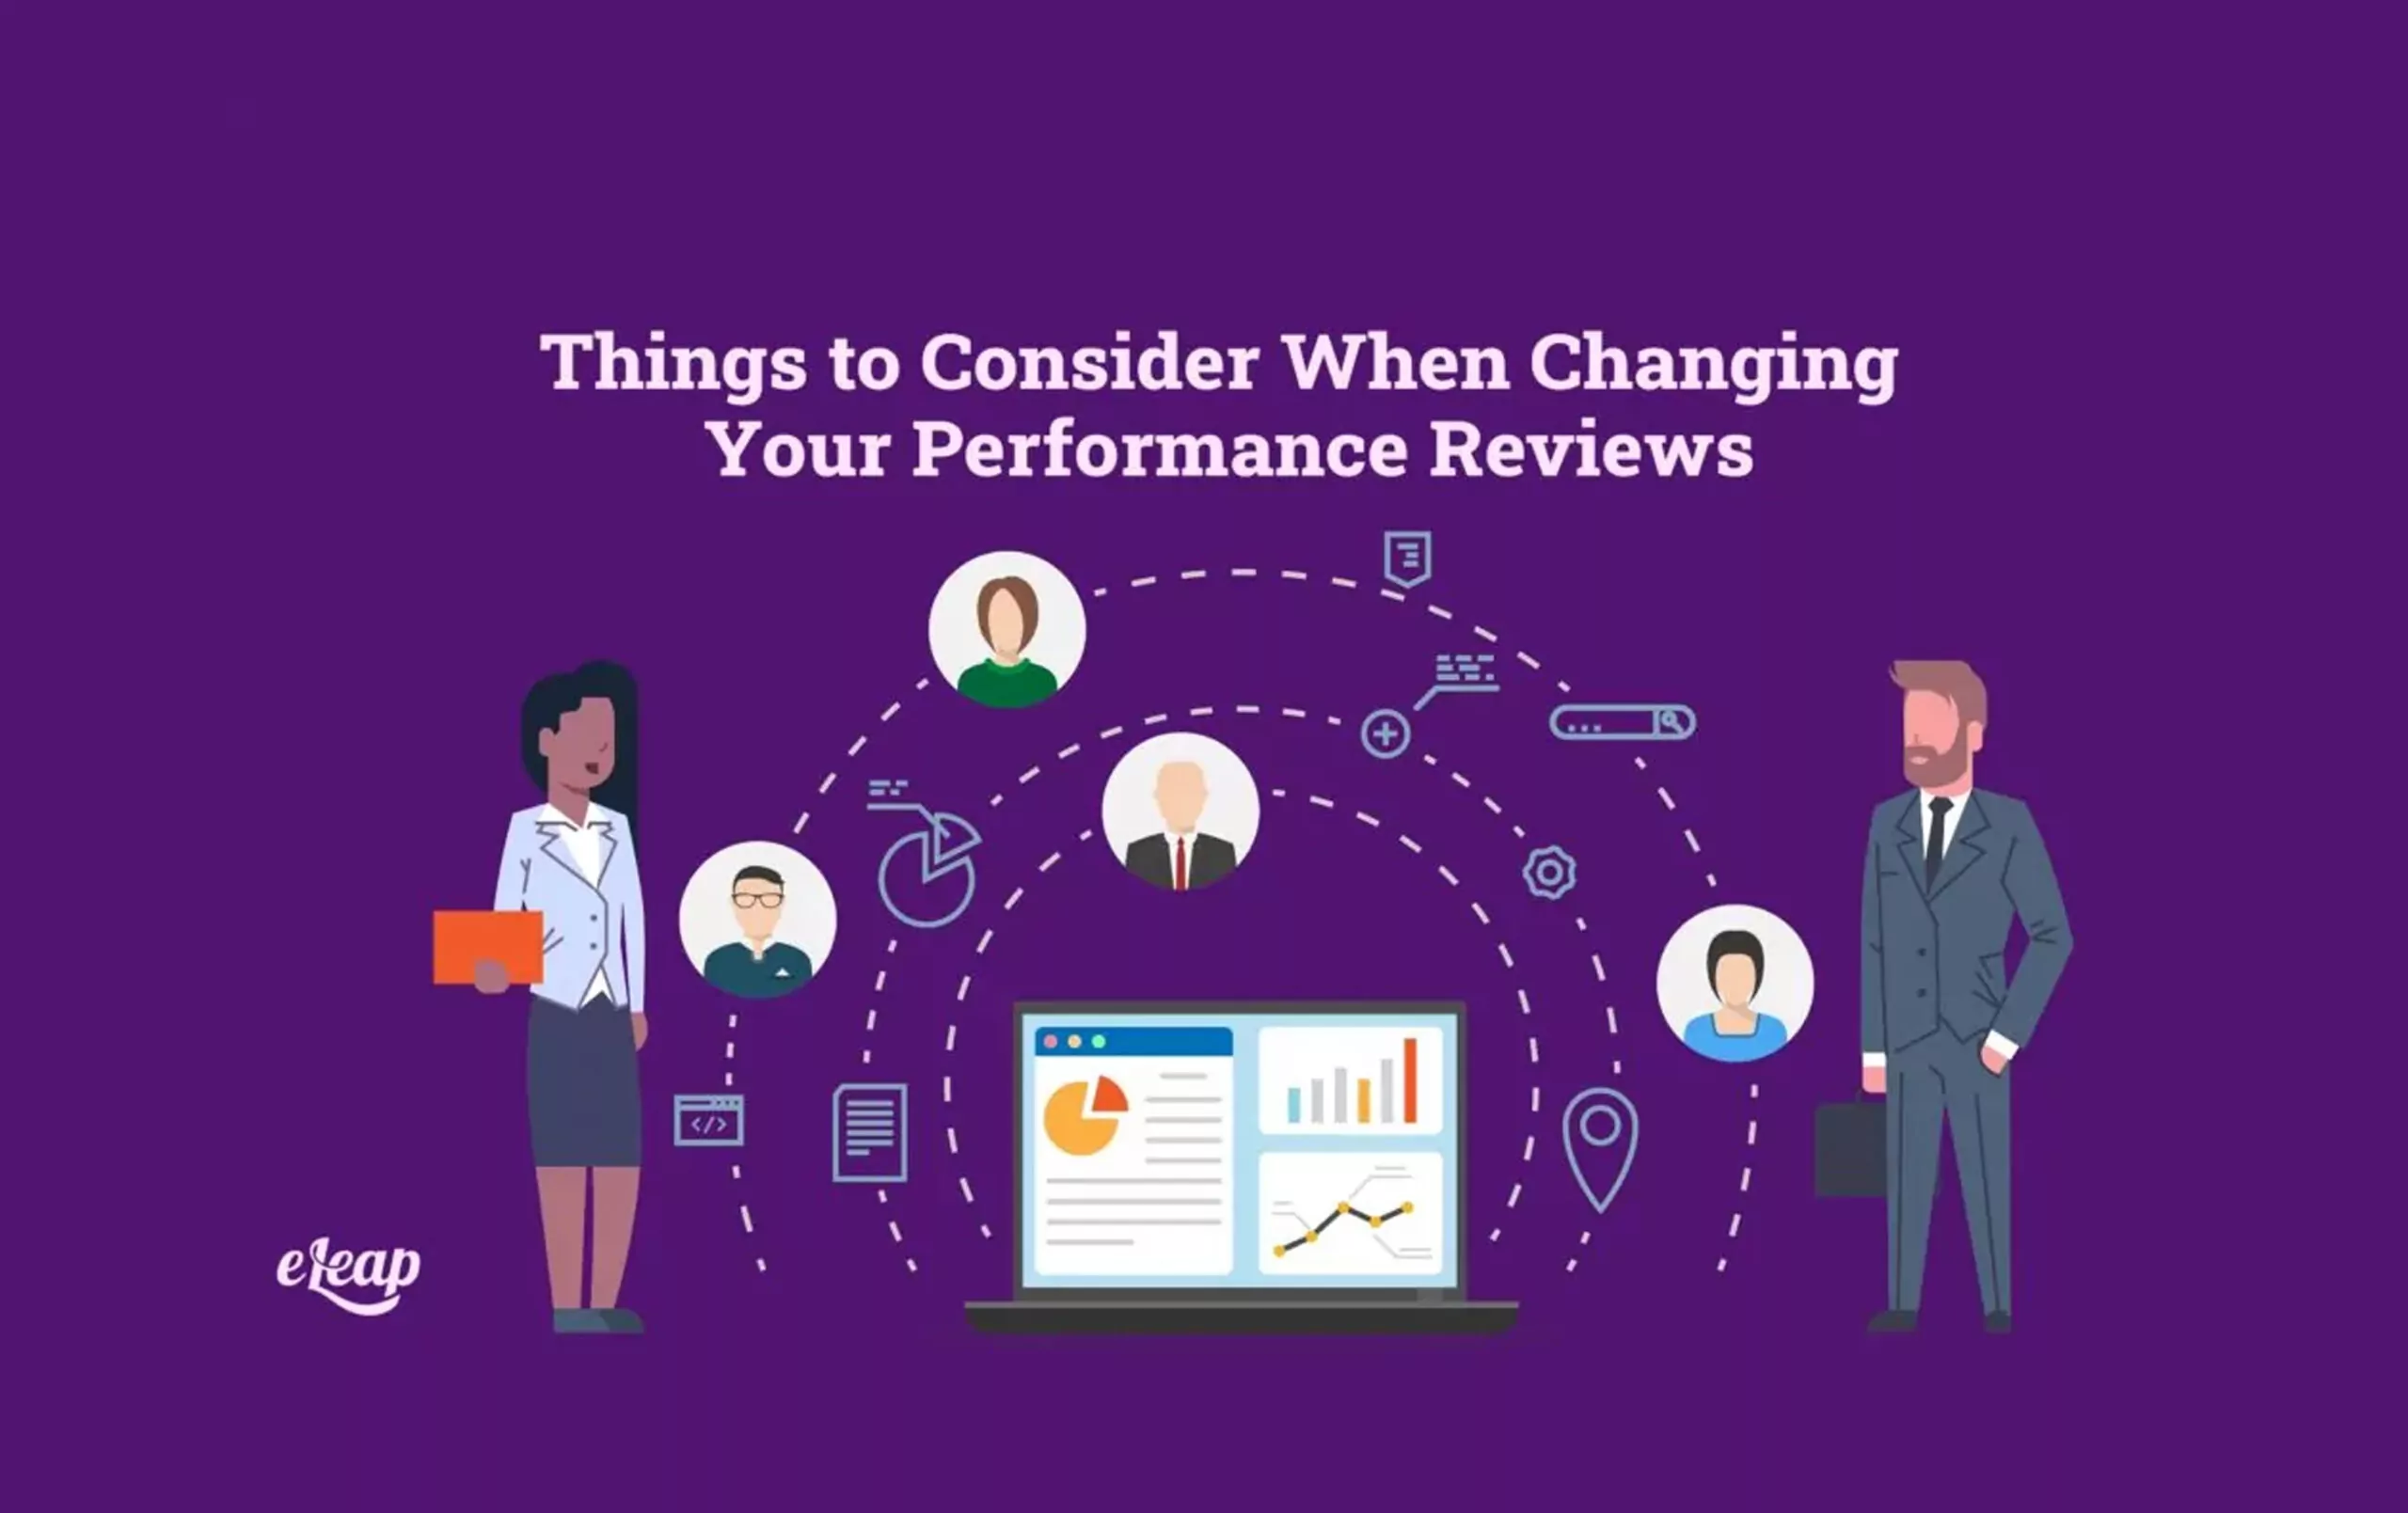 Your Performance Reviews